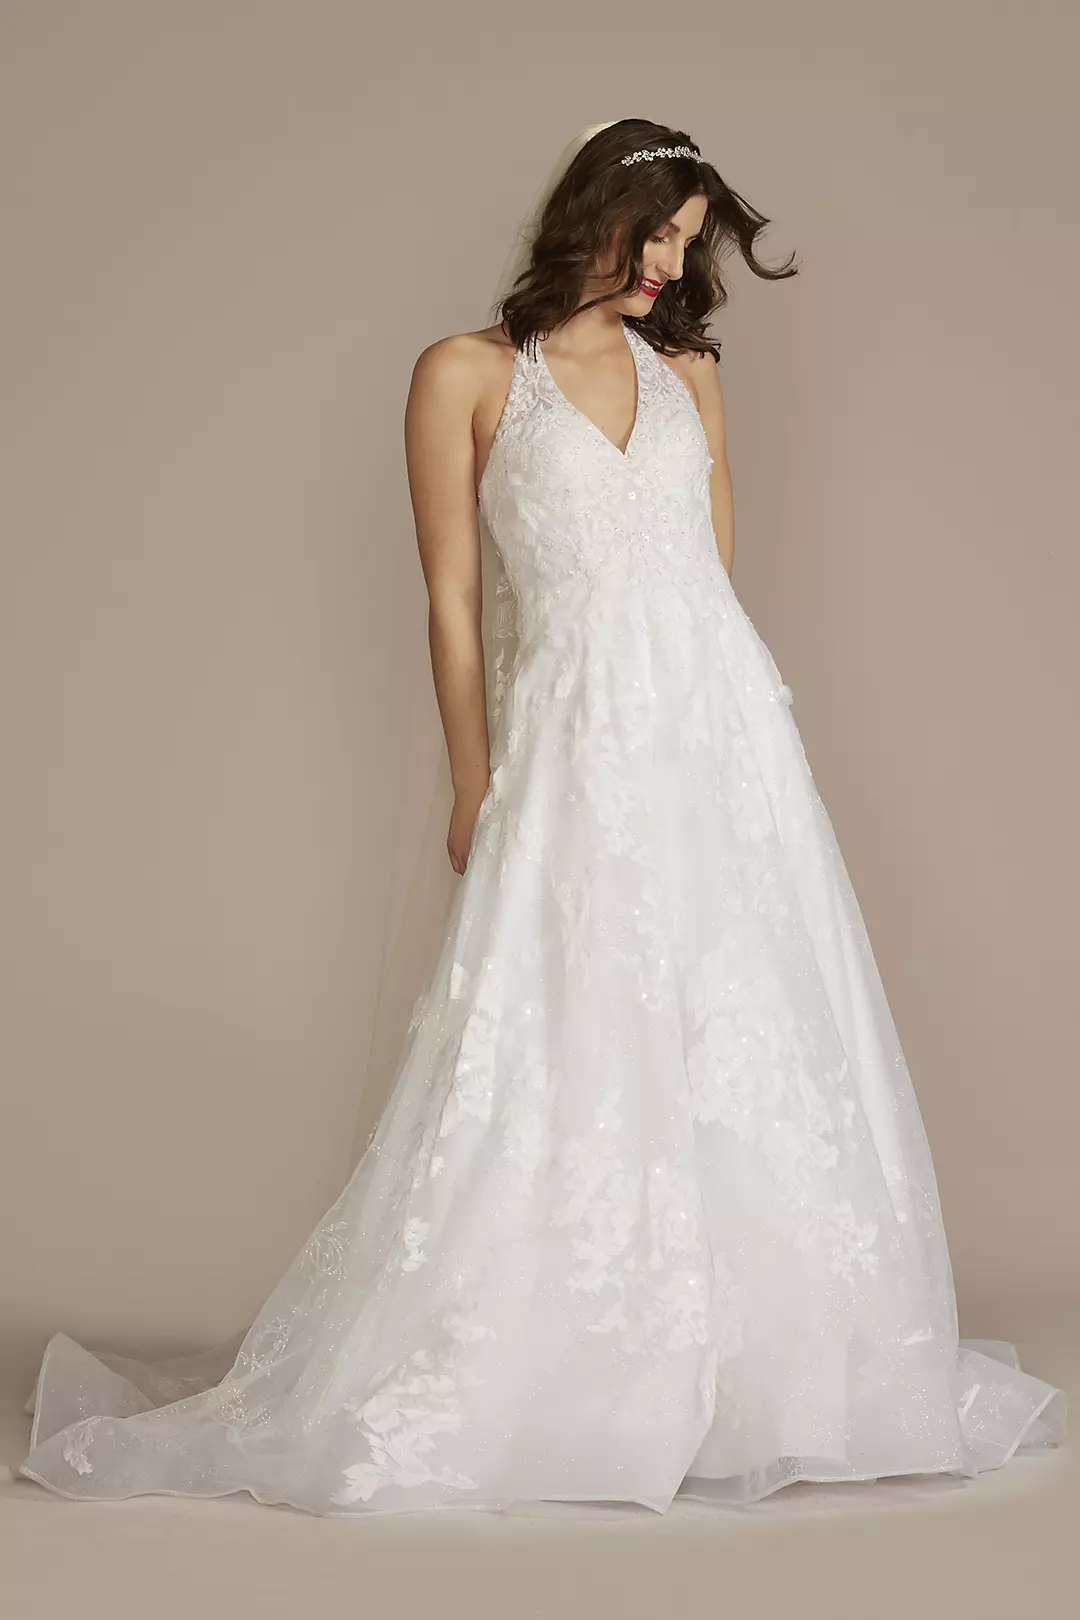 V-Neck Halter Beaded Lace Ball Gown Wedding Dress Image